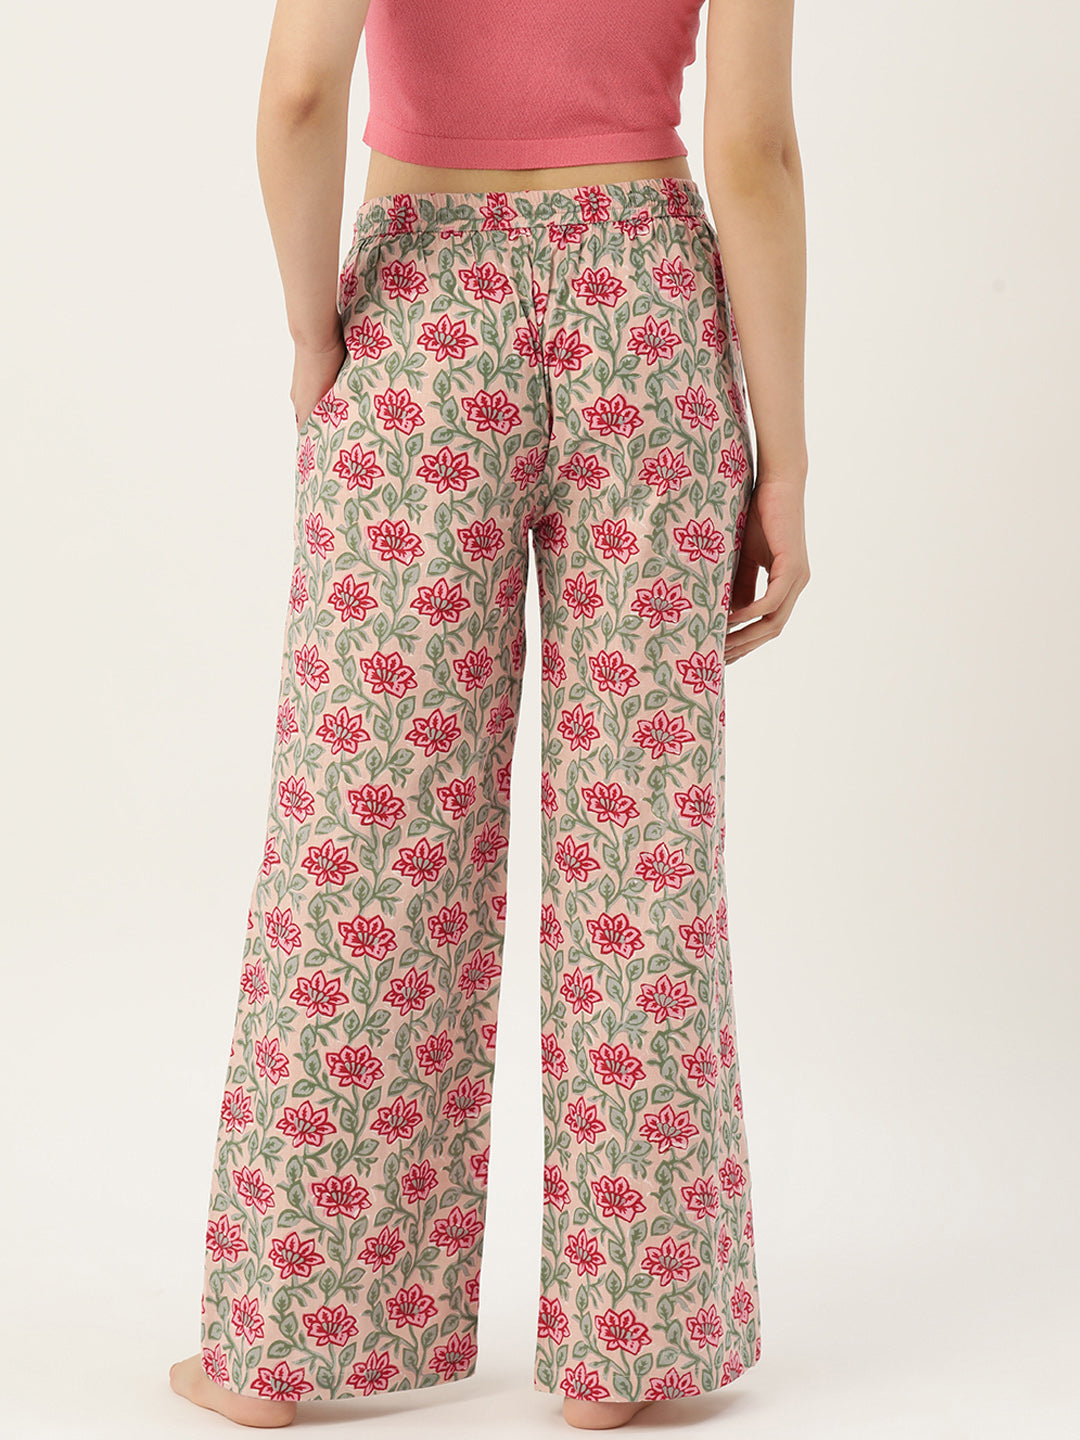 Women Floral Printed Cotton Straight Lounge Pants